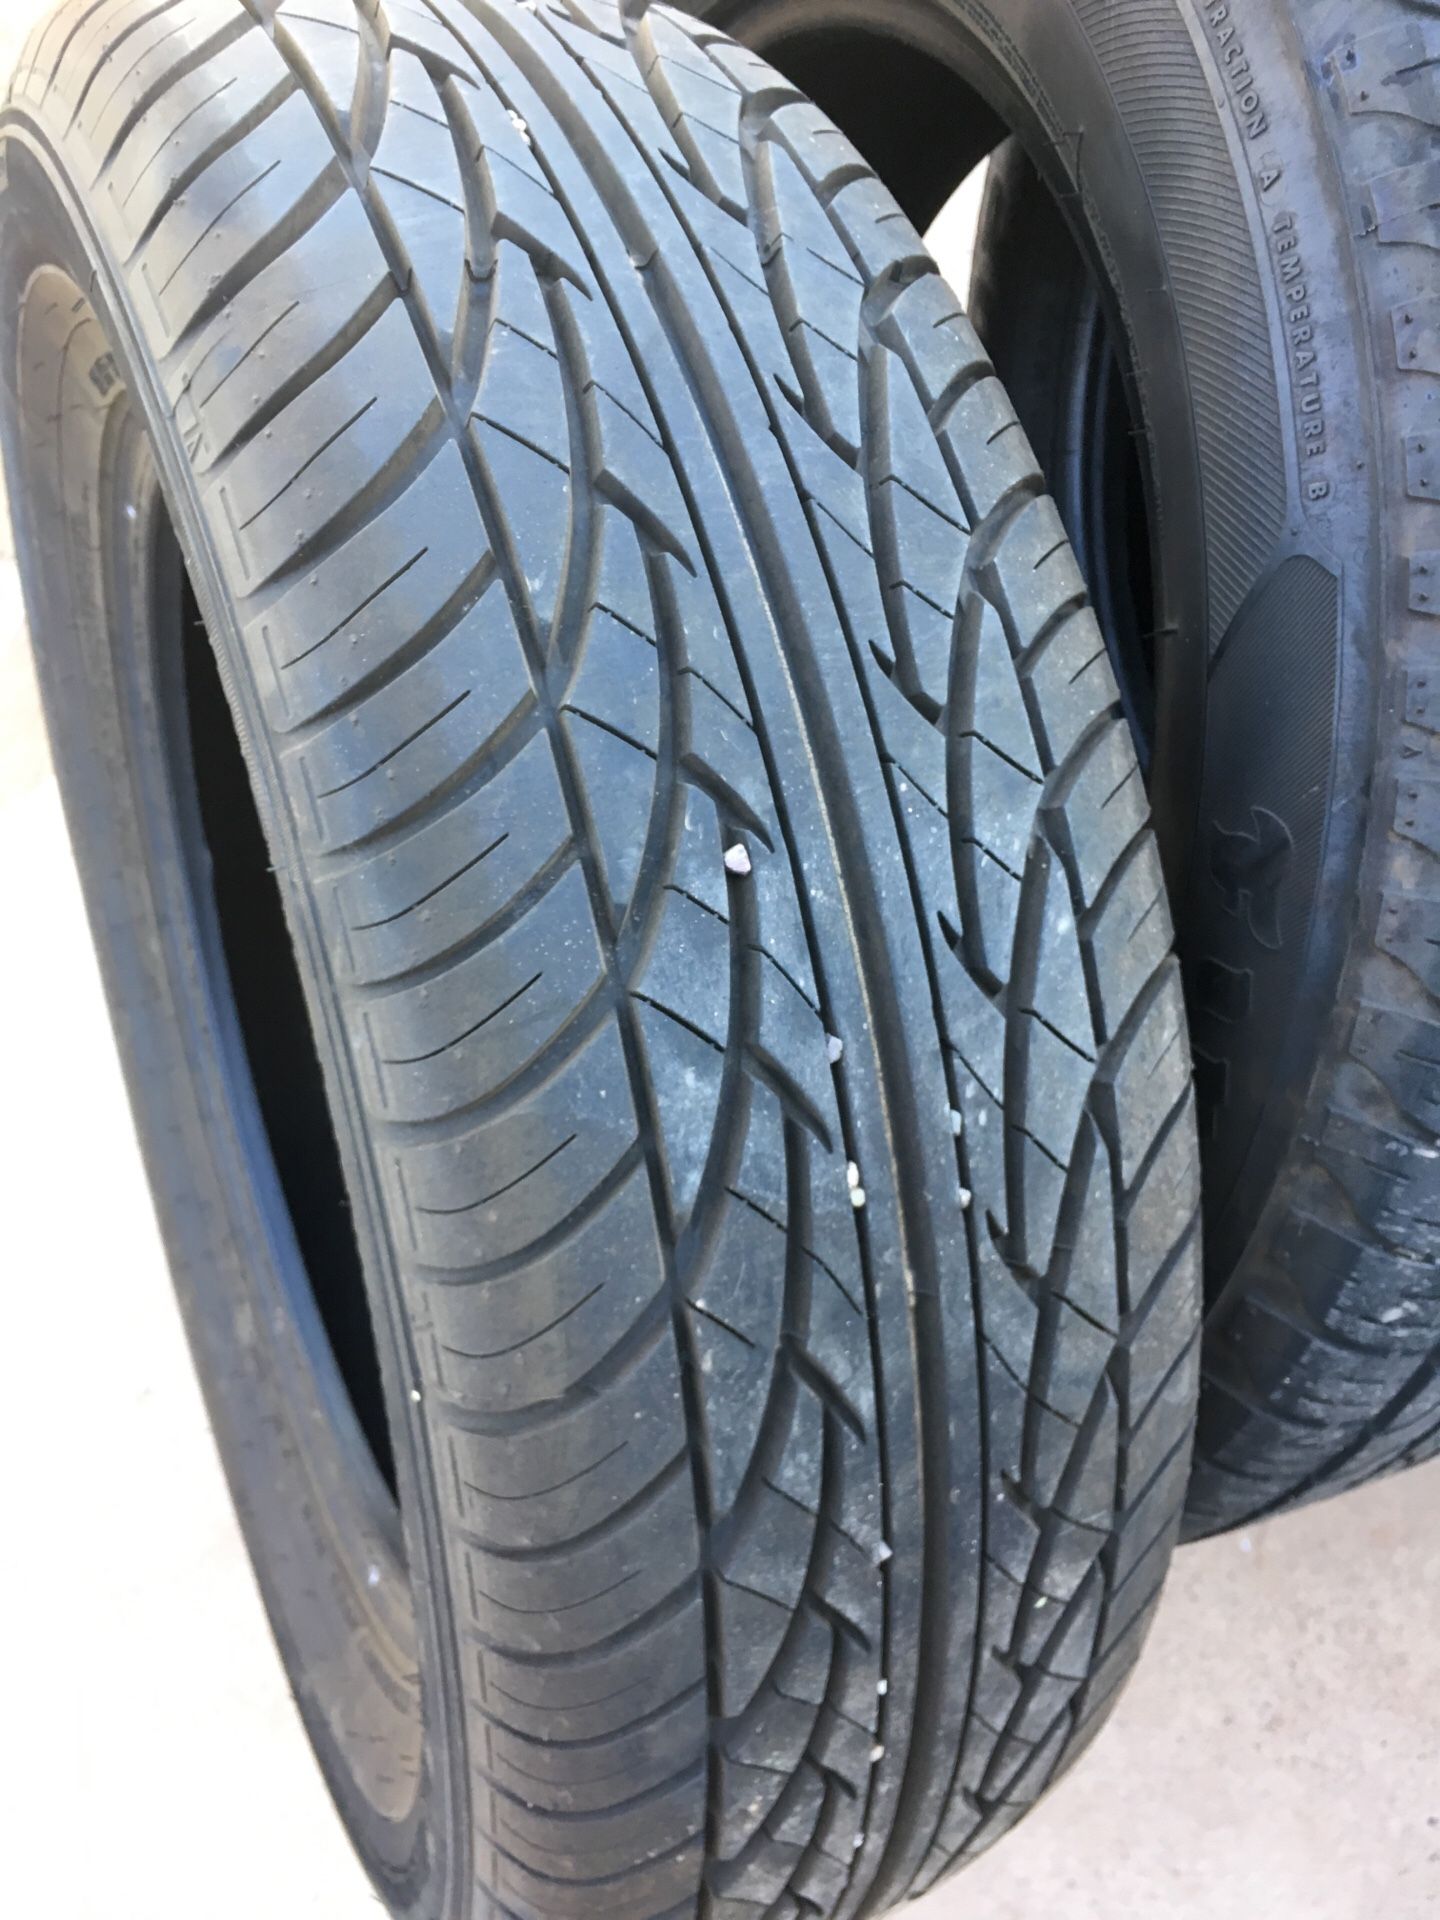 Great tires for cheap!!!!